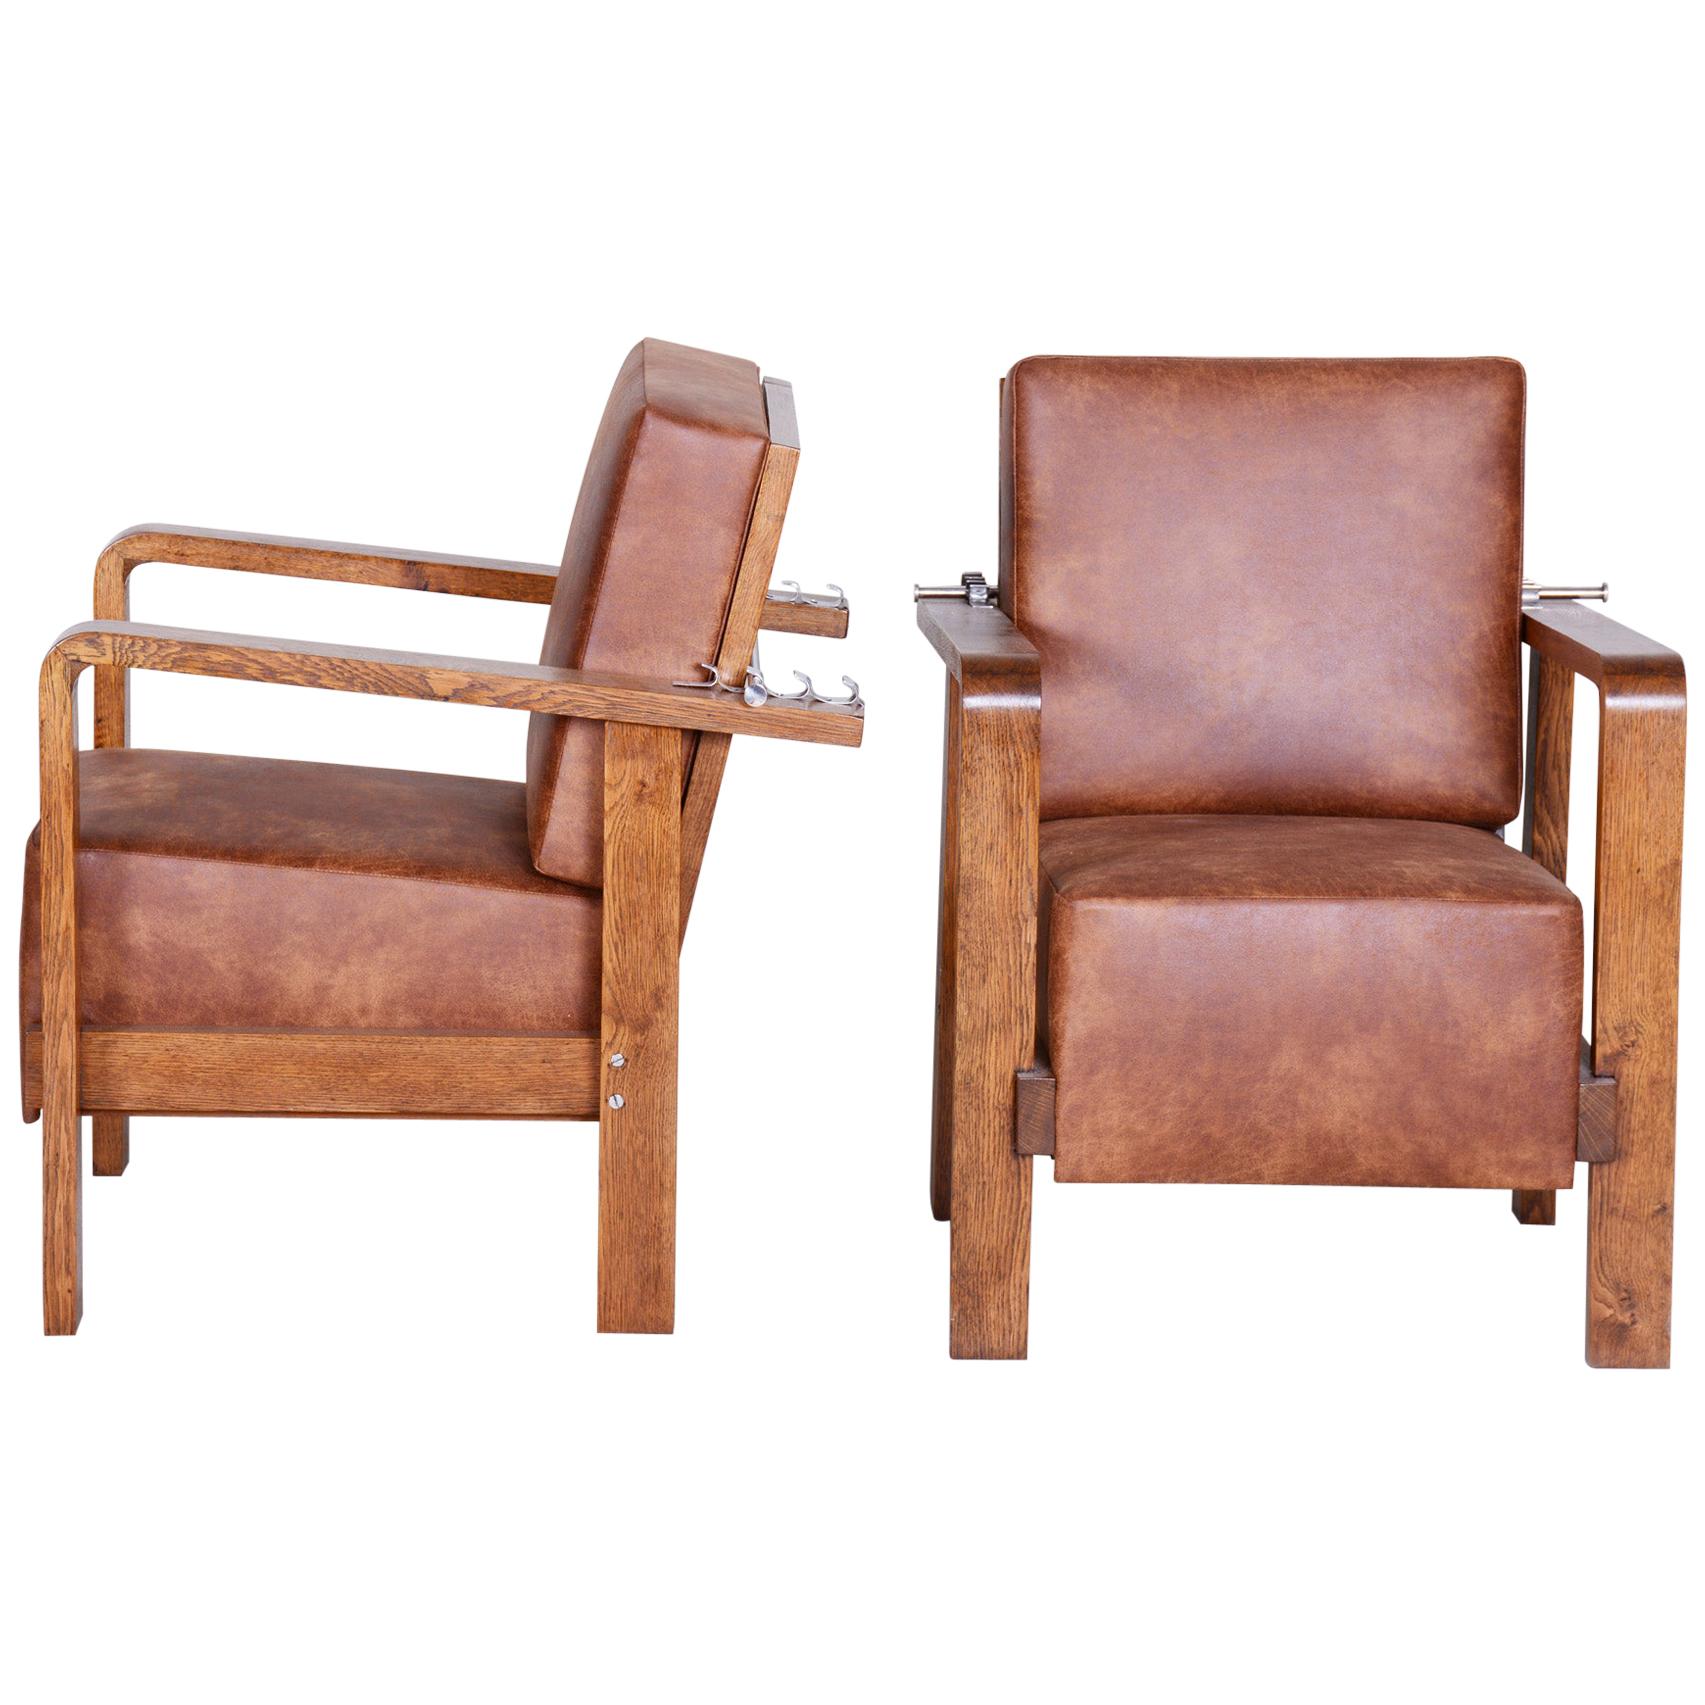 Pair of Czech Adjustable Functionalist Leather and Oak Armchairs, 1930s